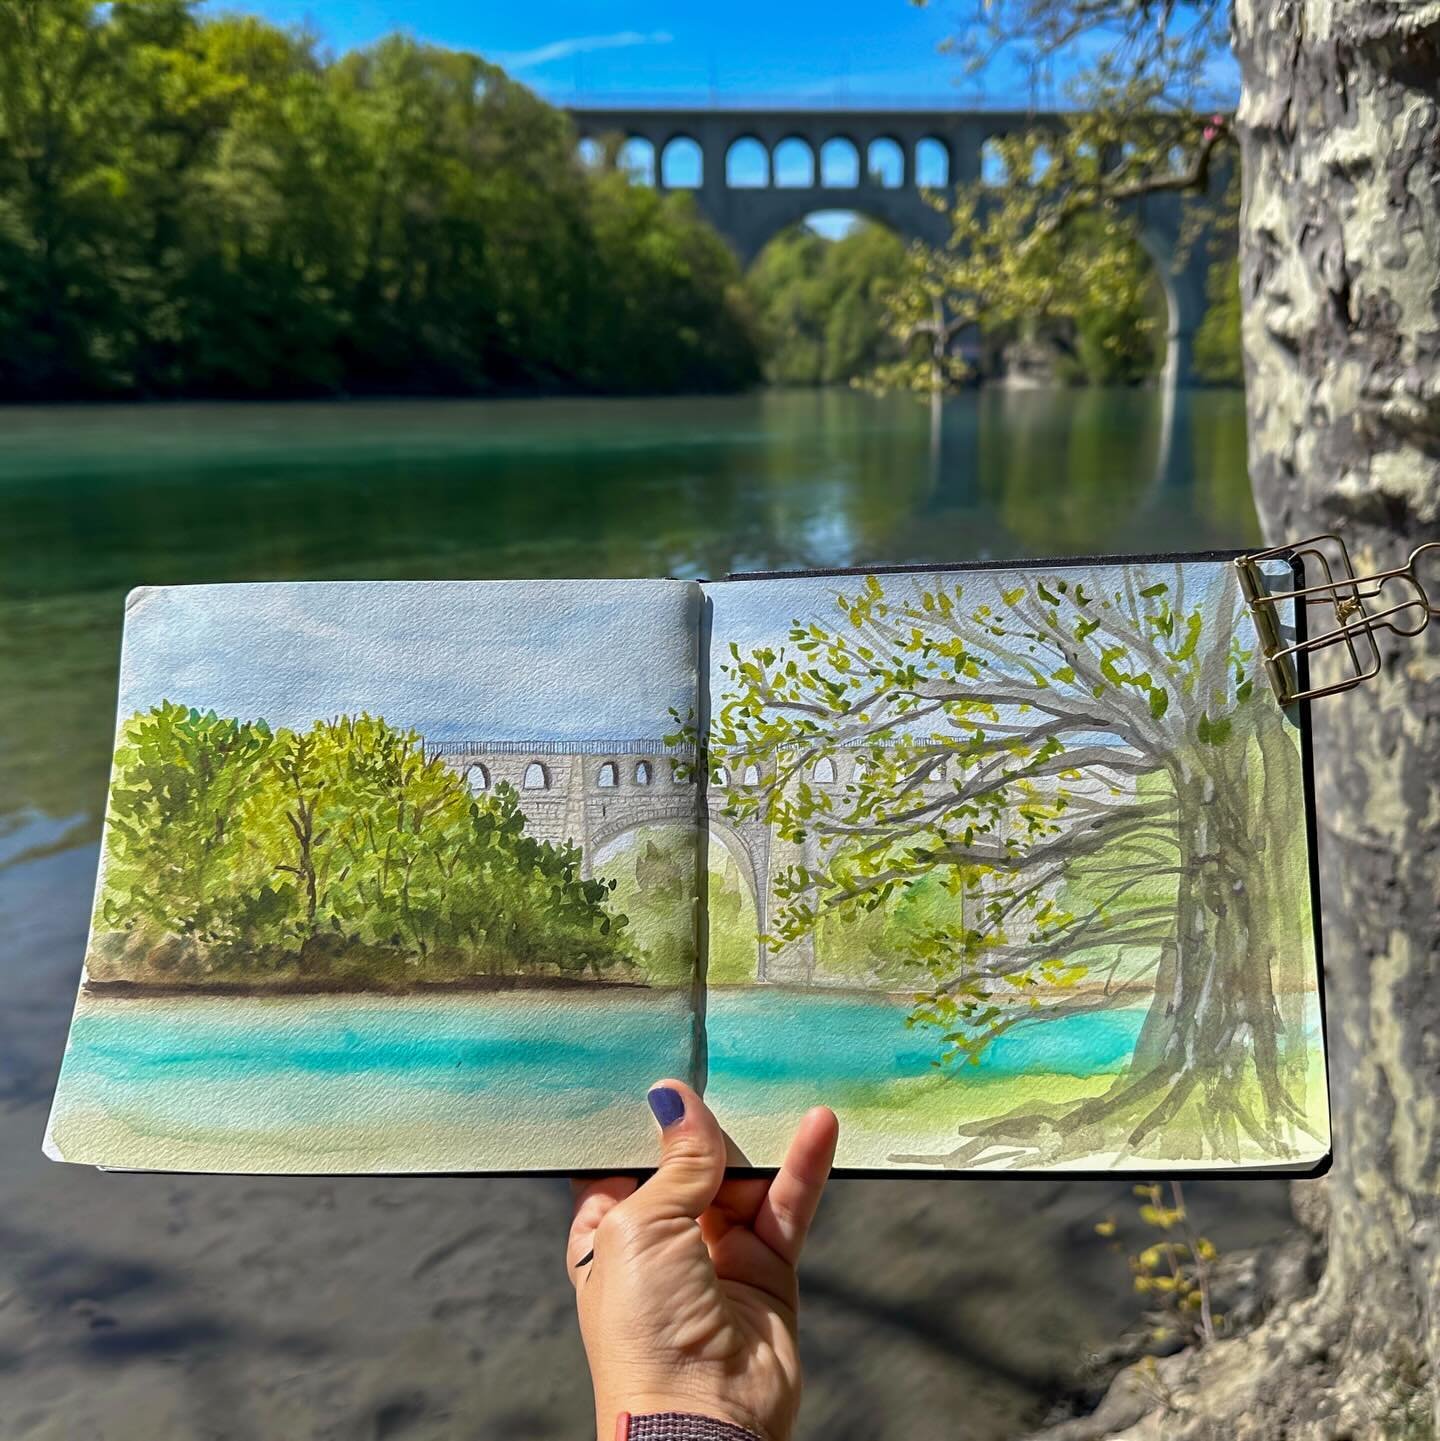 Can you believe this oasis of peace exists in the middle of a city like Geneva? 😍
Some closeups and more photos of our painting session in Geneva with @roxannes_sketchbook 💖 thank you so much for making me discover these awesome places ! 

#uskgene